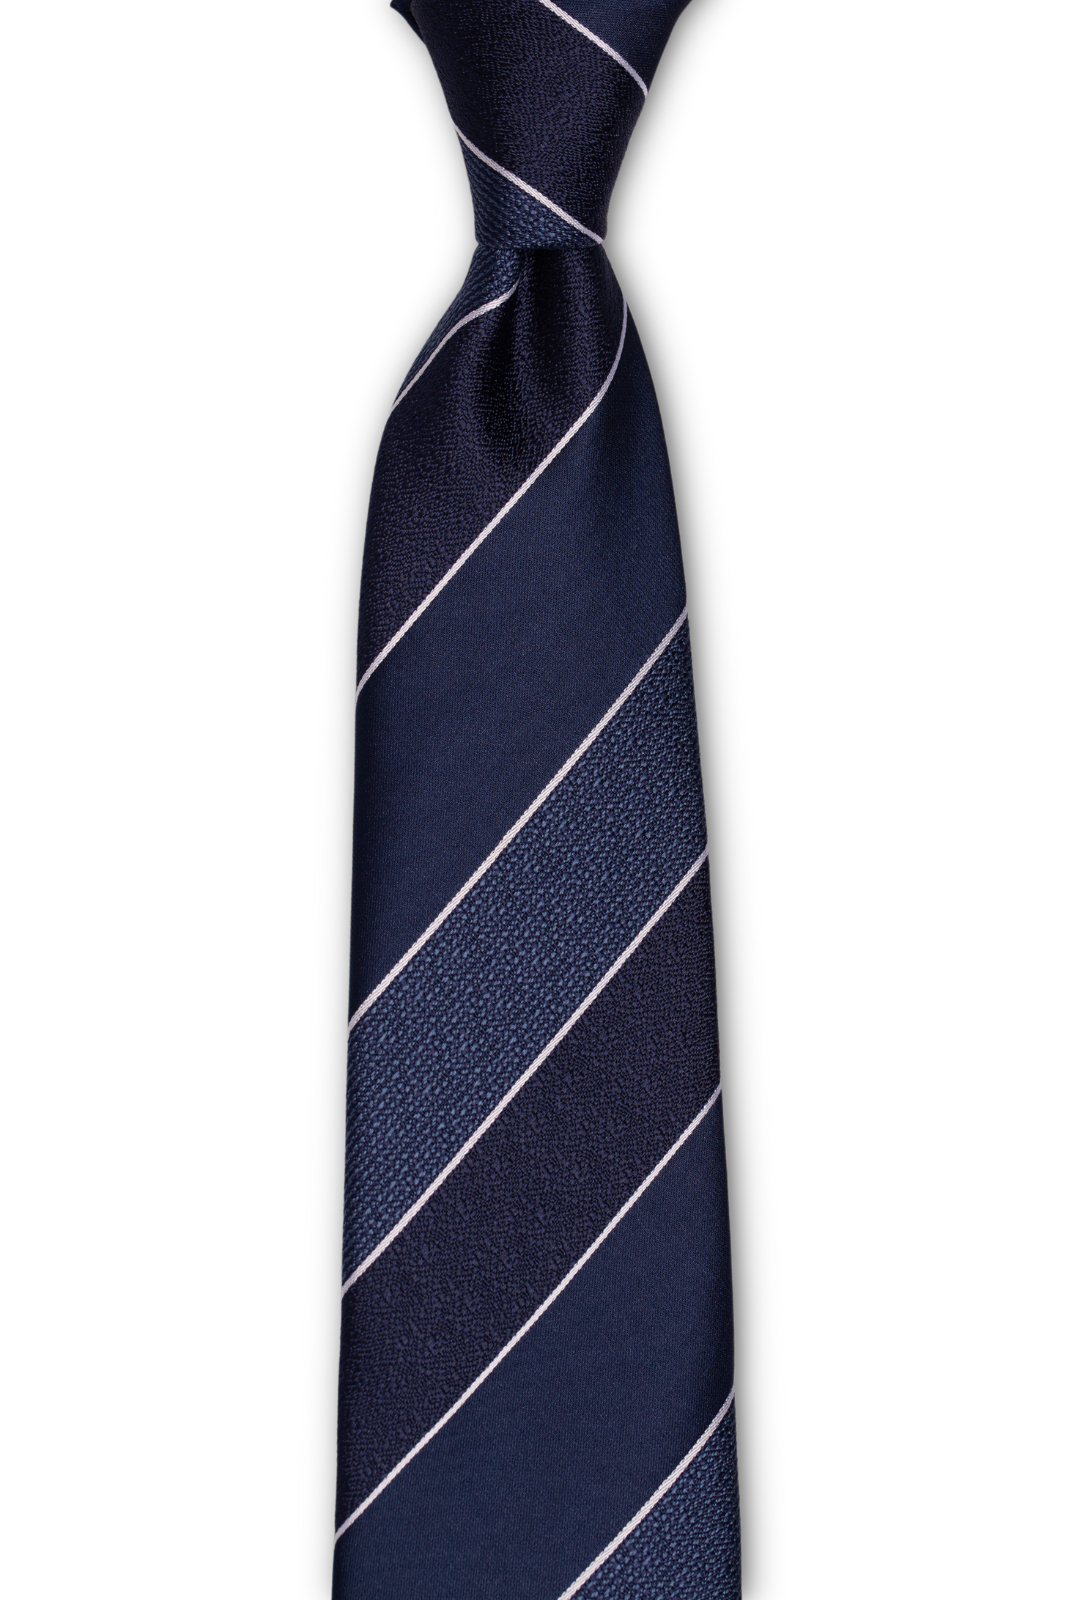 The Intrepid Traditional Tie